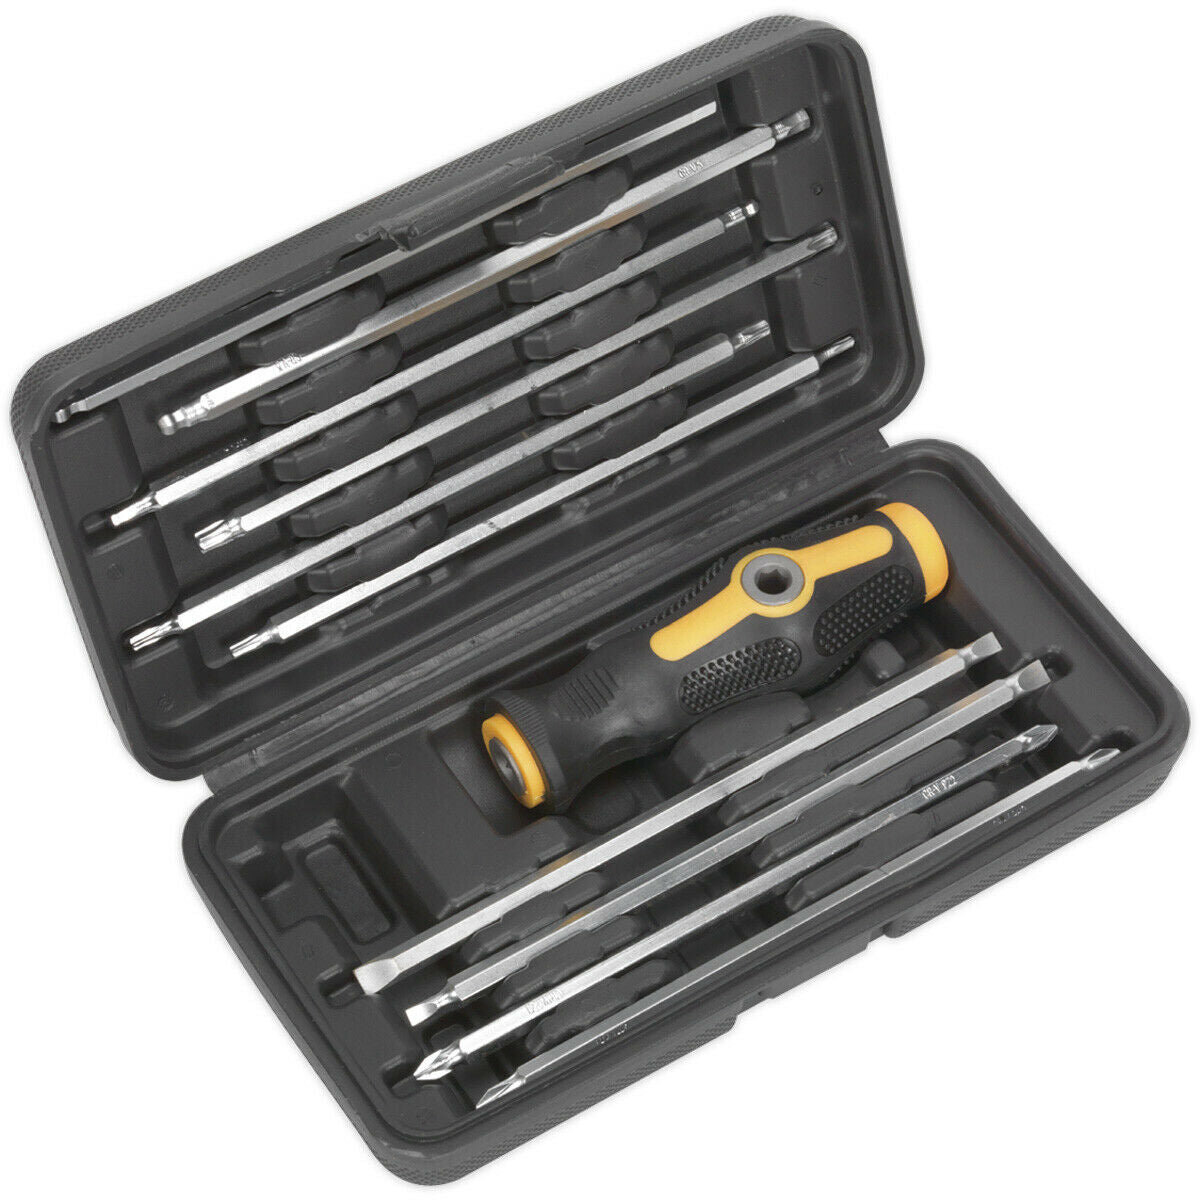 20-in-1 T Bar Screwdriver Set - Slotted Phillips TRX Hex Ball - Long Bits & Case